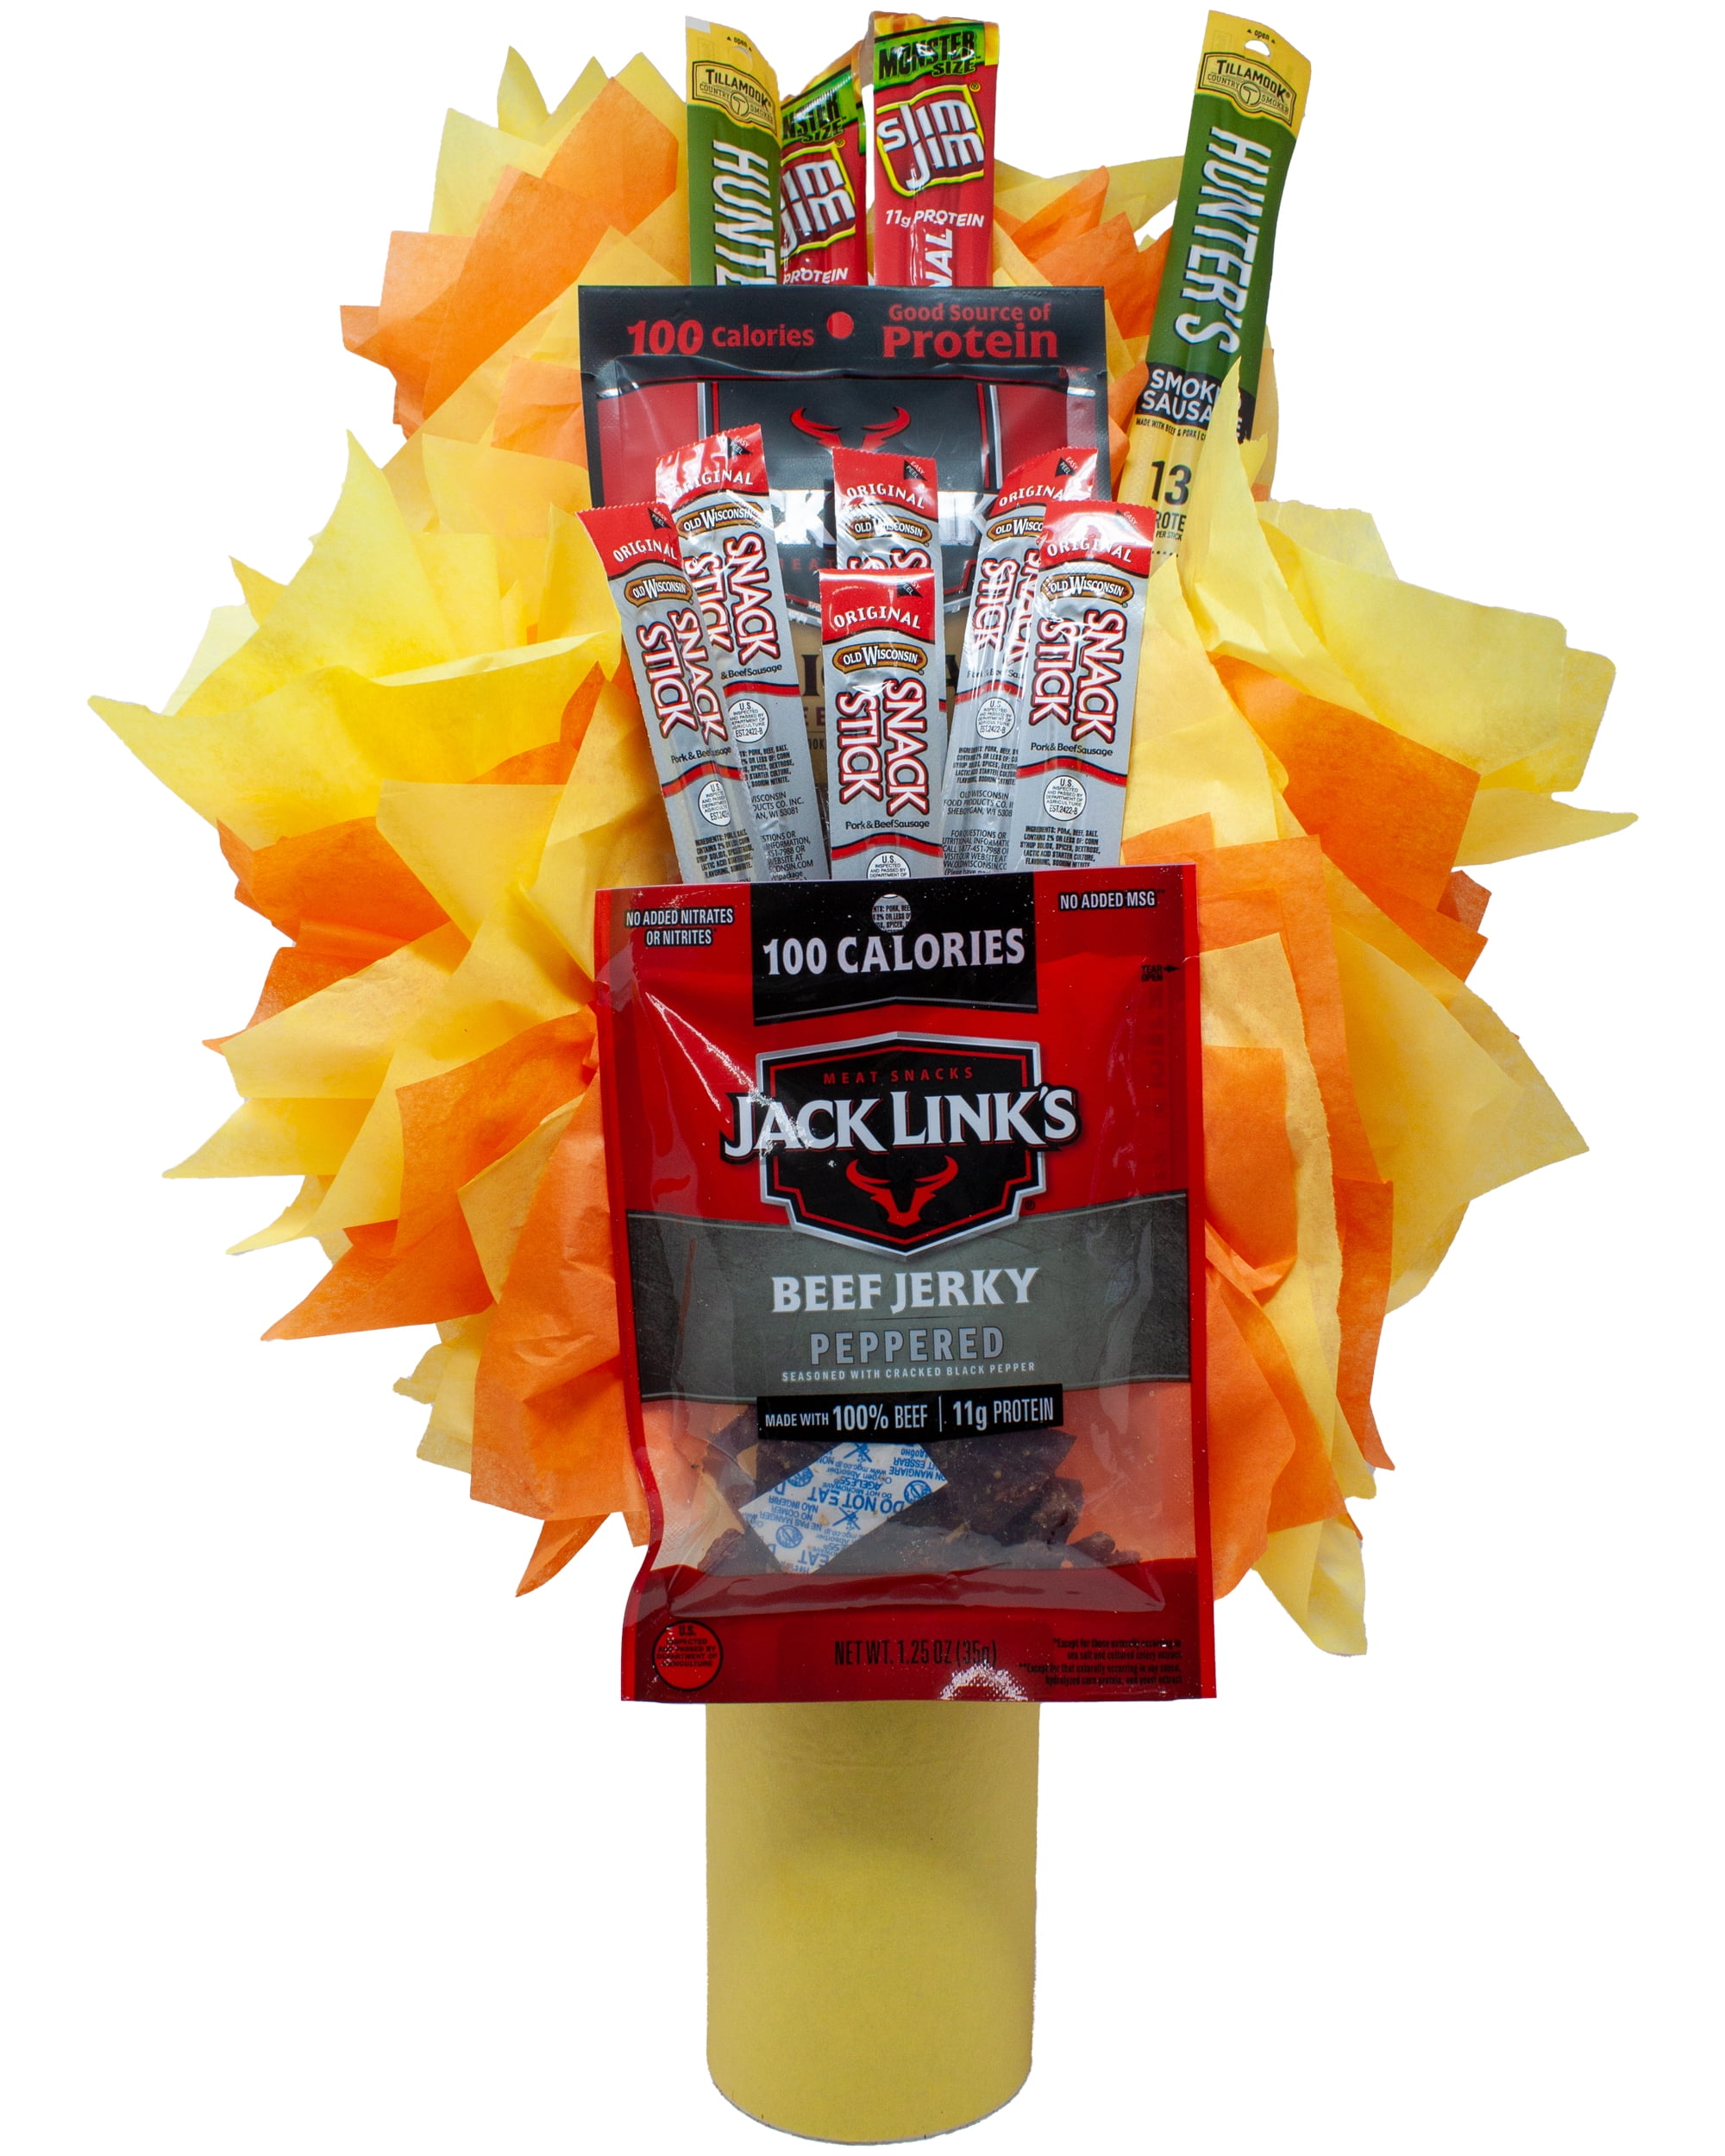 95210 Bunny James Premium Jerky Gift Box  Hit Promotional Products